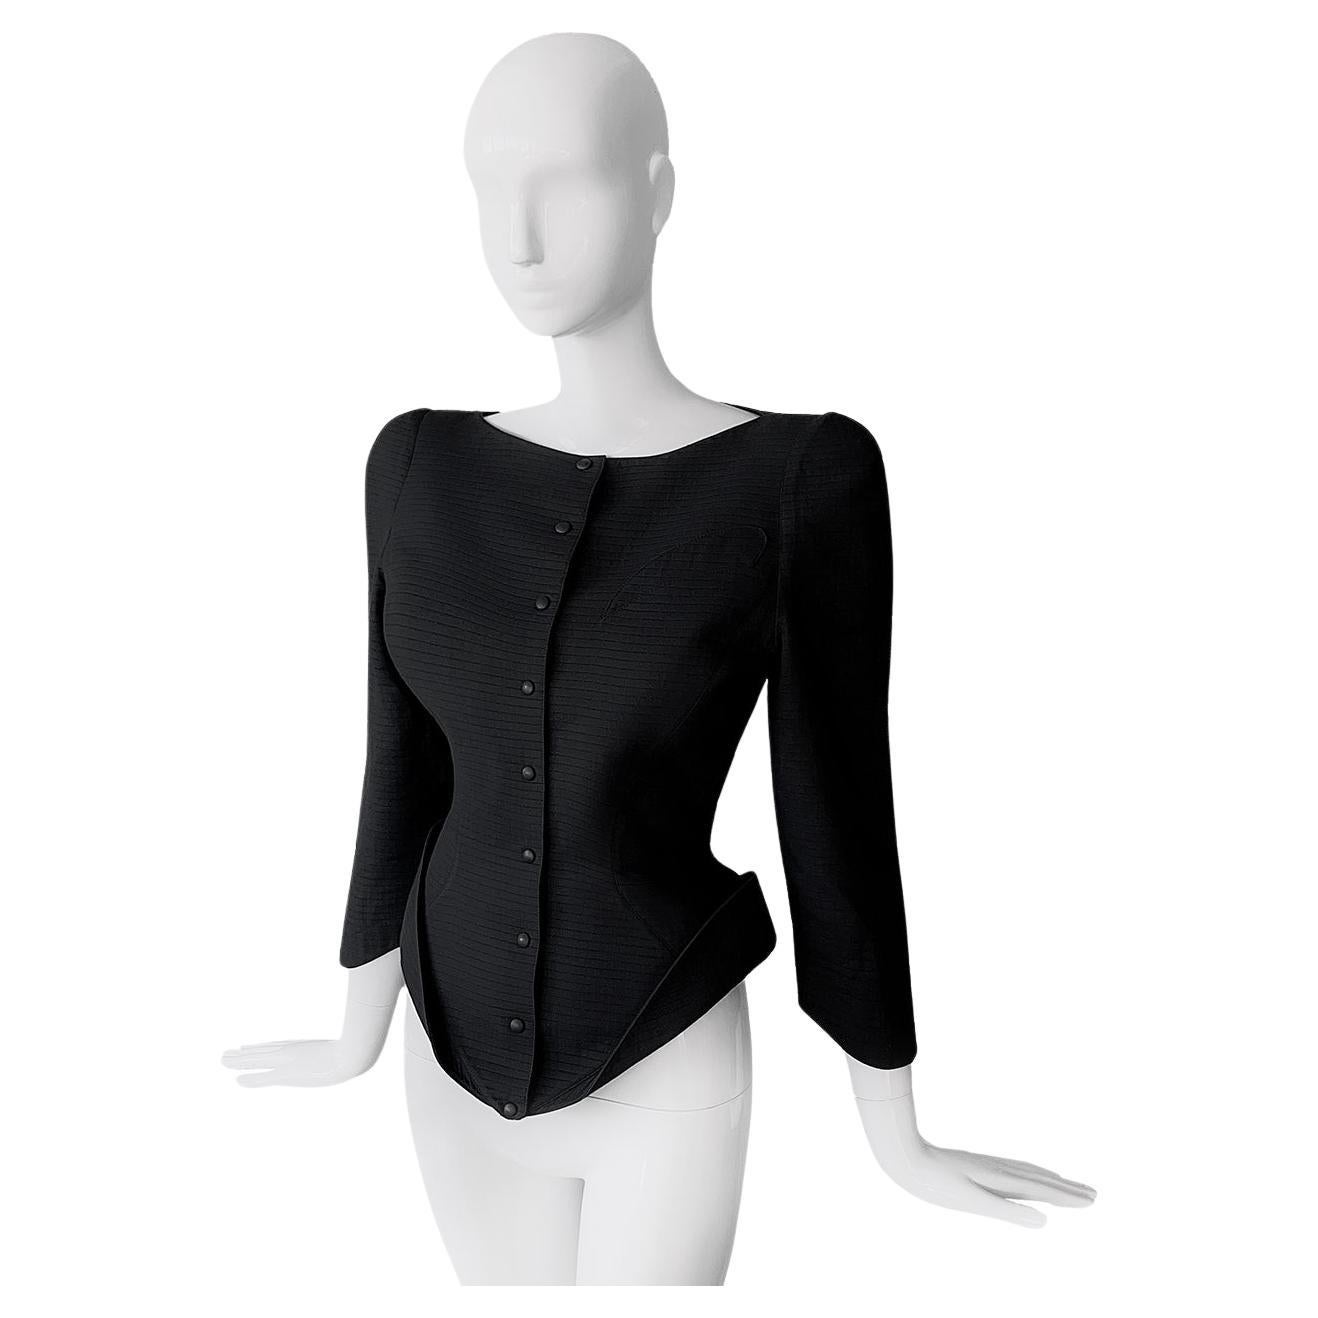 Thierry Mugler 1989 Dramatic Sculptural  Avant- Garde Jacket Top For Sale